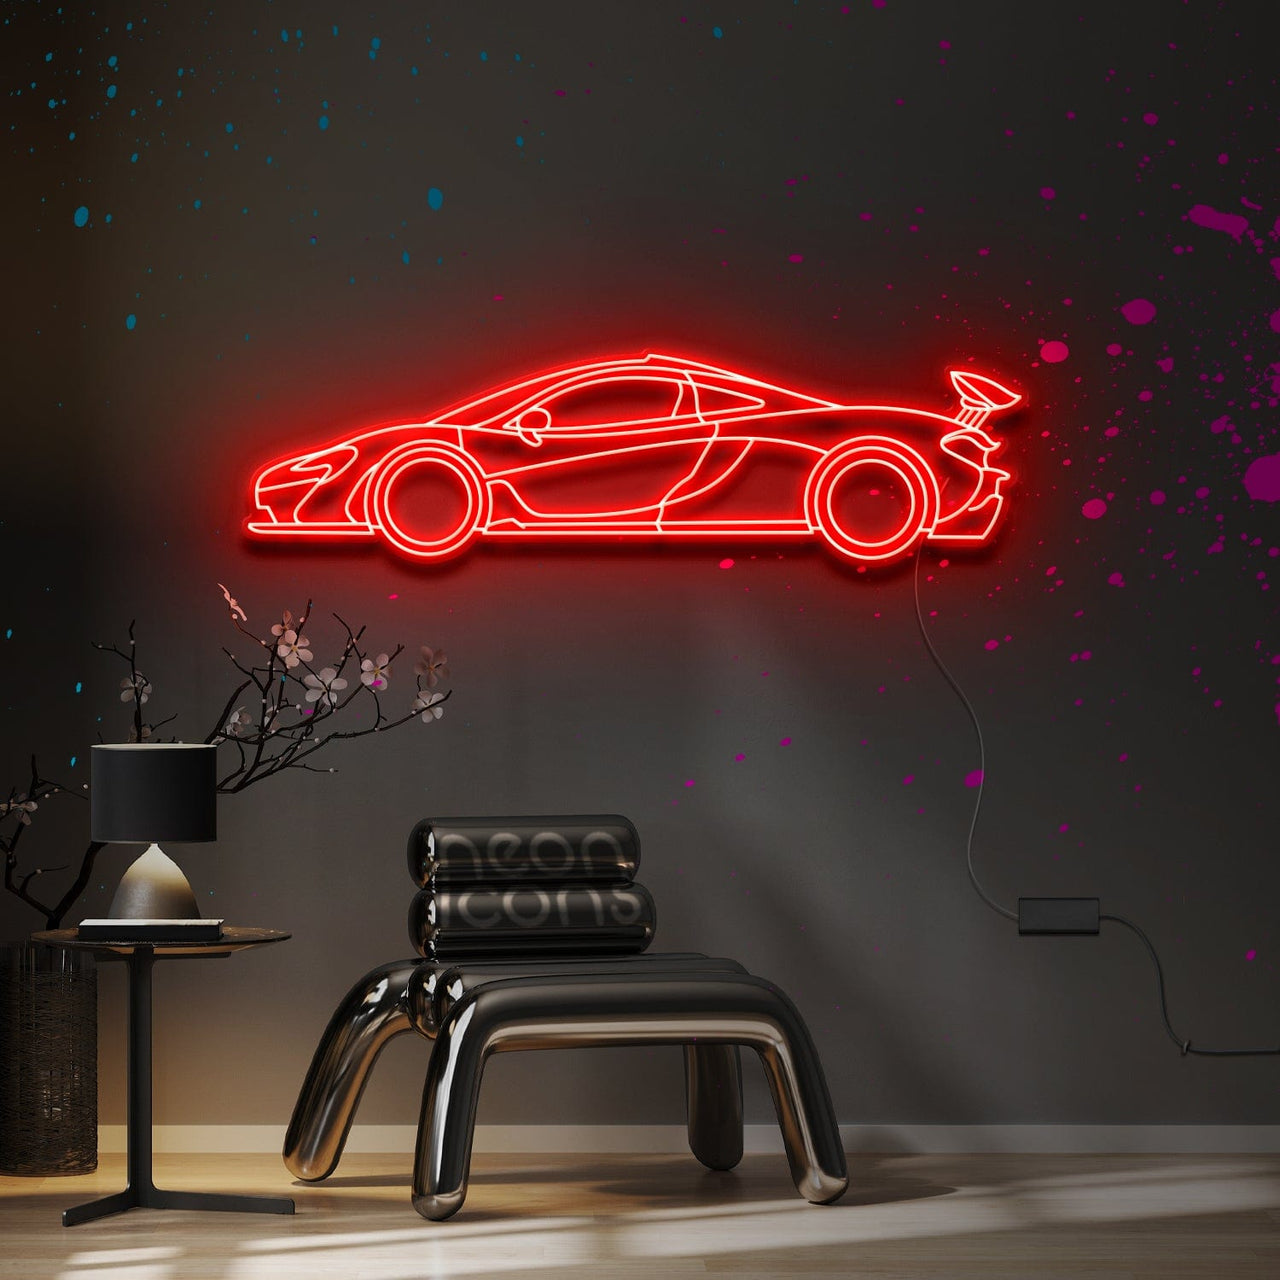 "McLaren P1" Neon Sign 4ft x 1.2ft / Red / LED Neon by Neon Icons